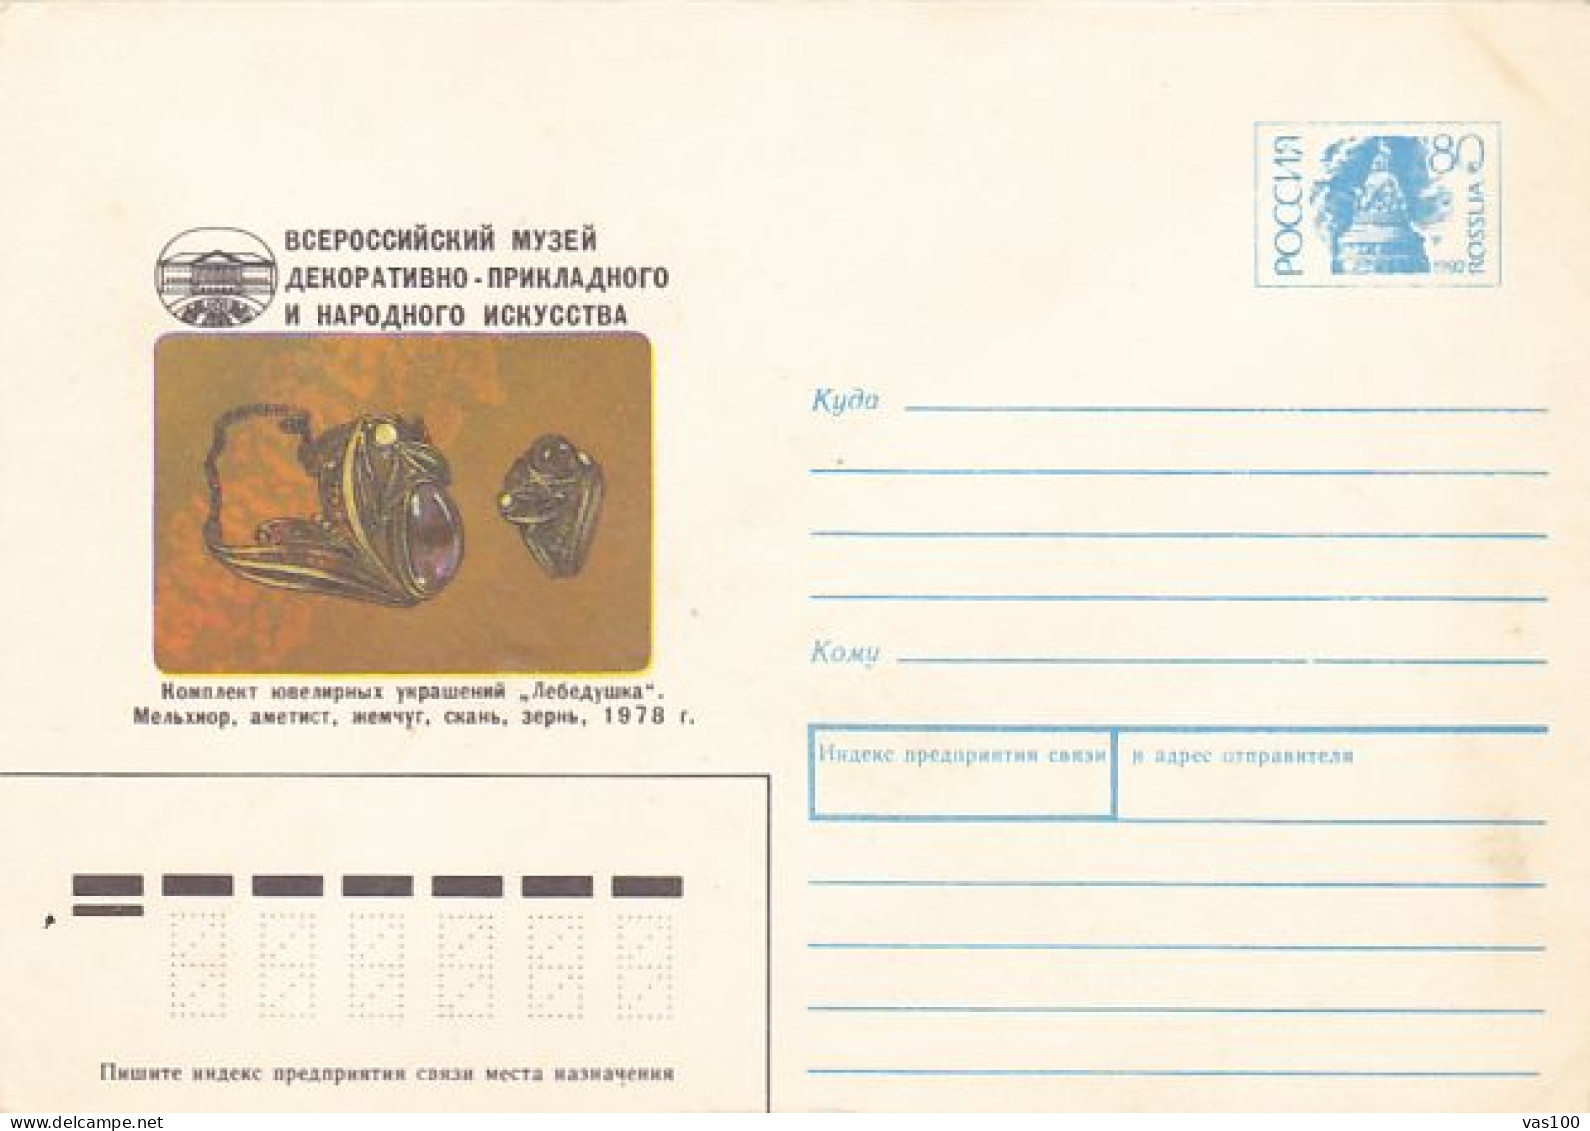 MOSCOW MUSEUM, JEWELRIES, COVER STATIONERY, ENTIER POSTAL, 1992, RUSSIA - Interi Postali